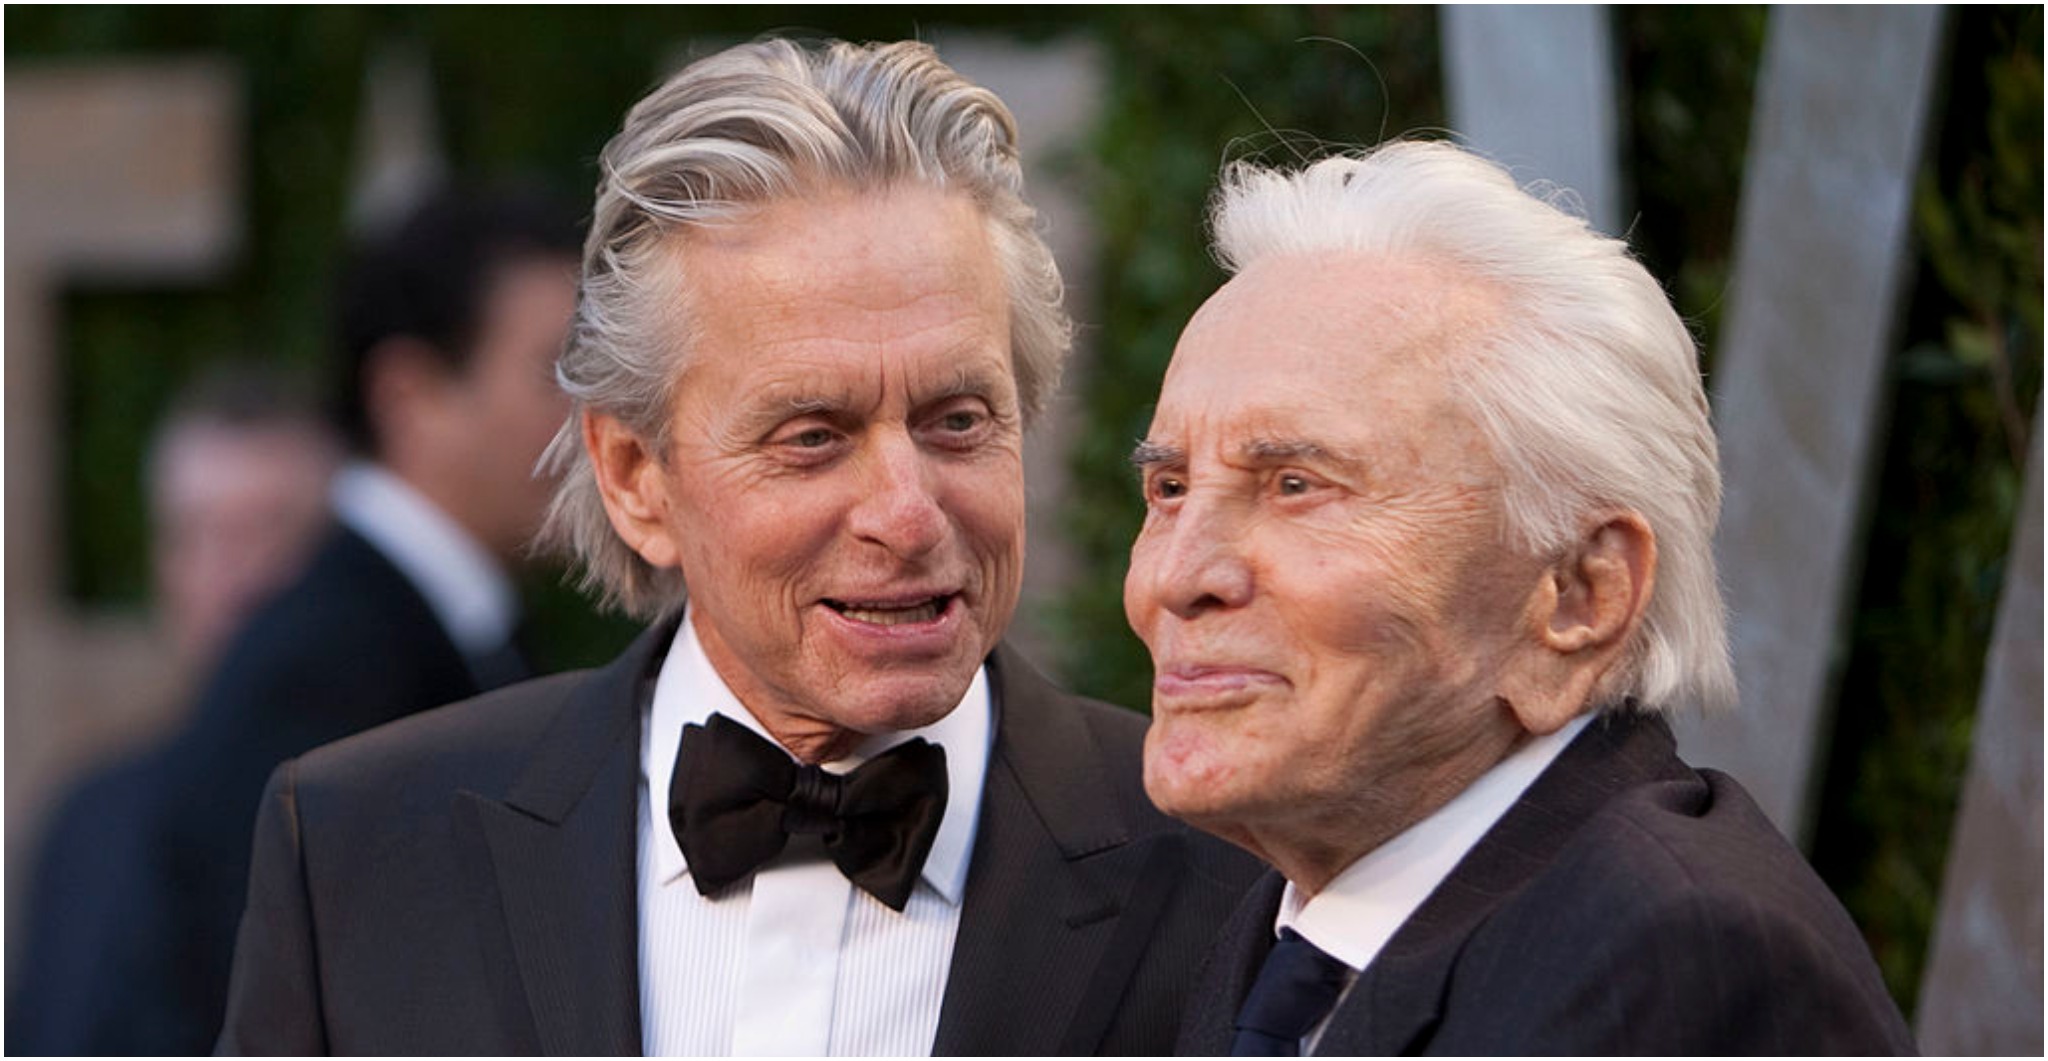 Kirk Douglas leaves his entire $61m fortune for charity, wills nothing to son